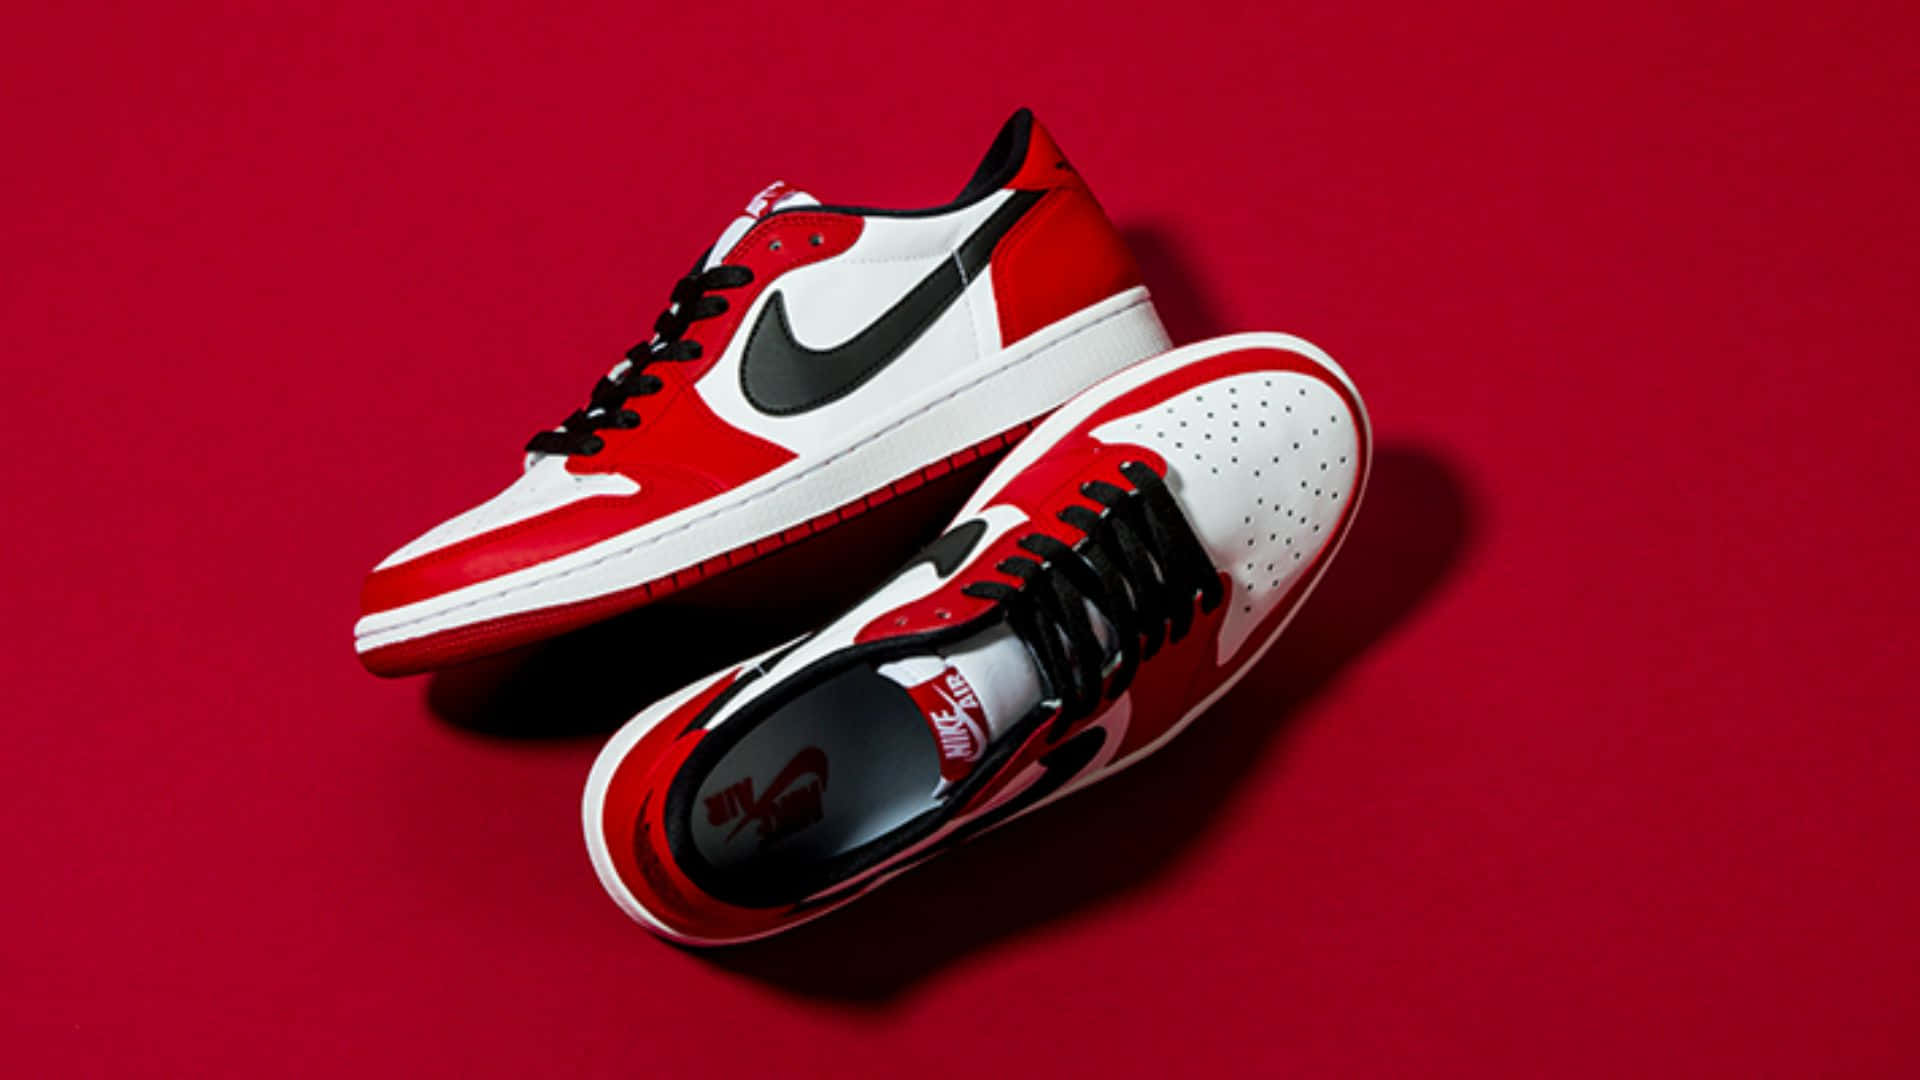 The iconic Nike Air Jordan 1 Red and White basketball sneakers Wallpaper